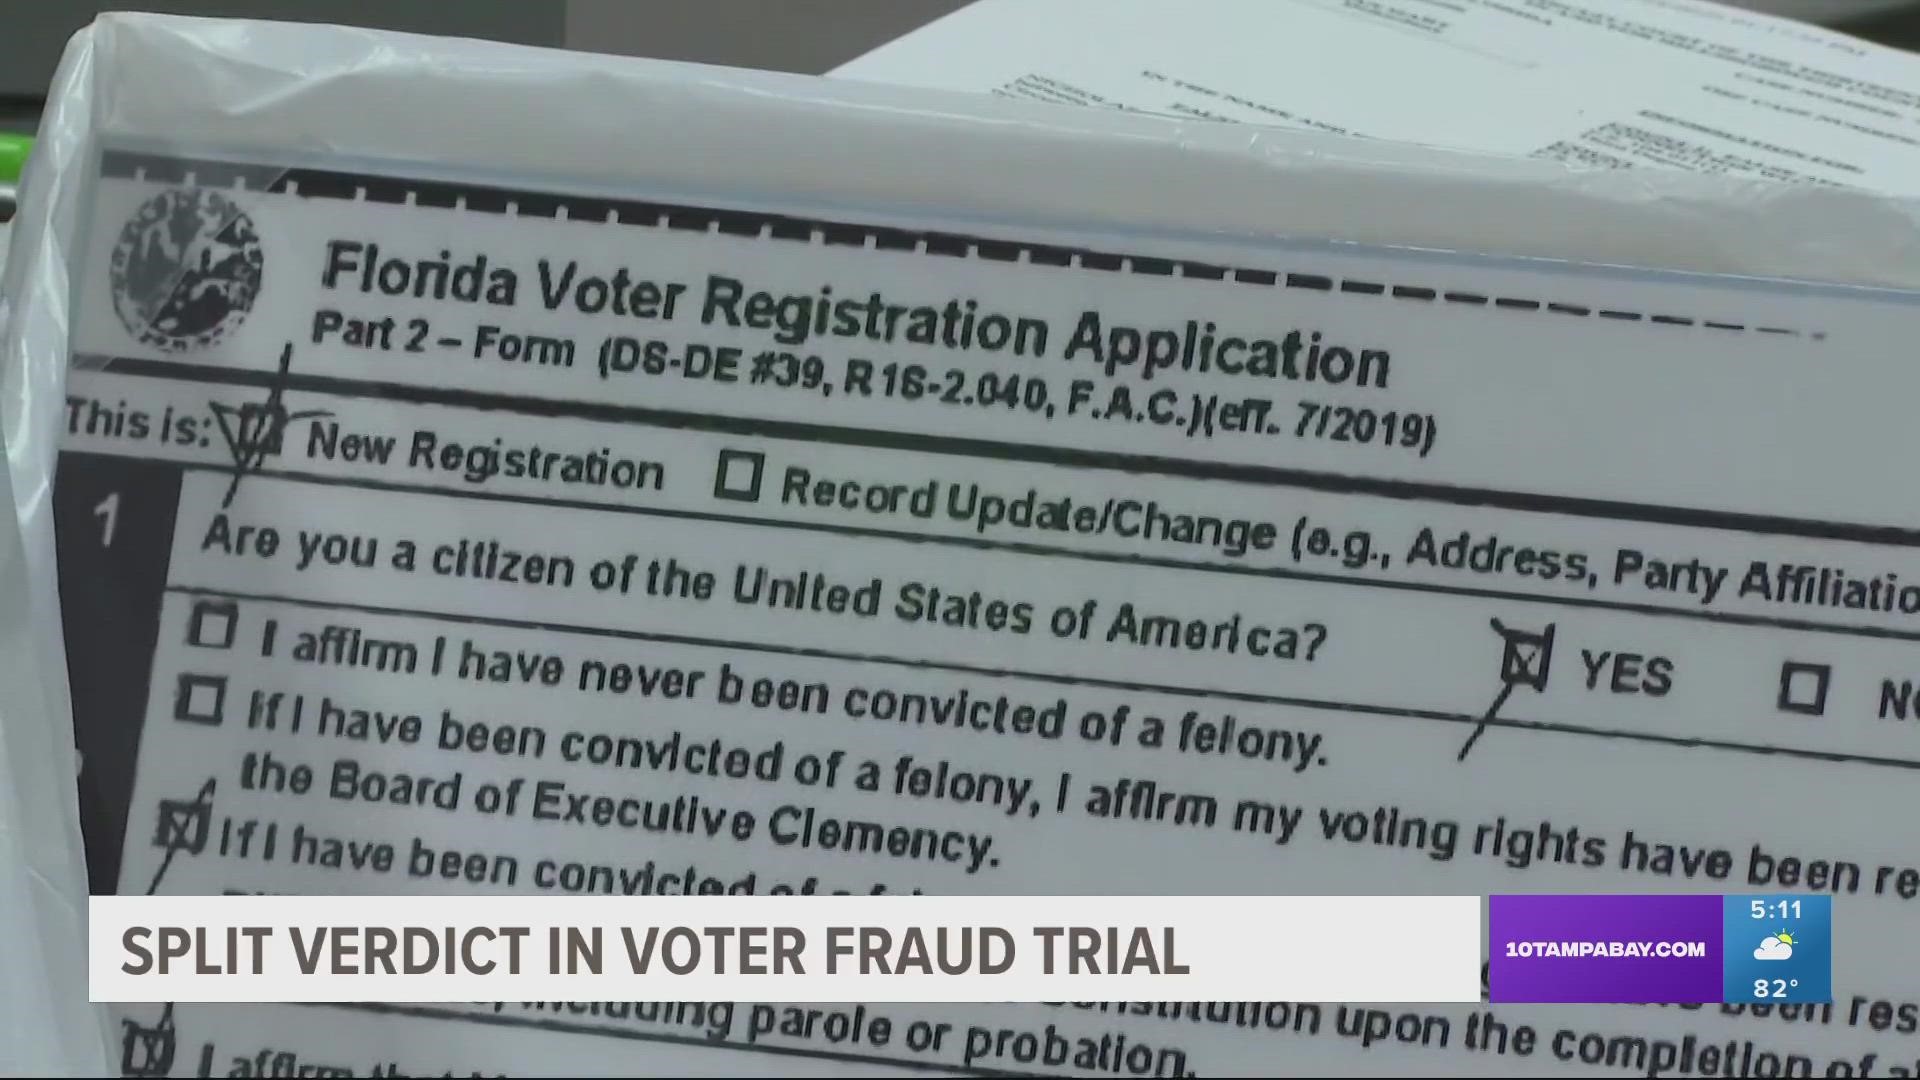 Nathan Hart of Gibsonton faced one count of false swearing for stating he was an eligible voter on his voter registration application.